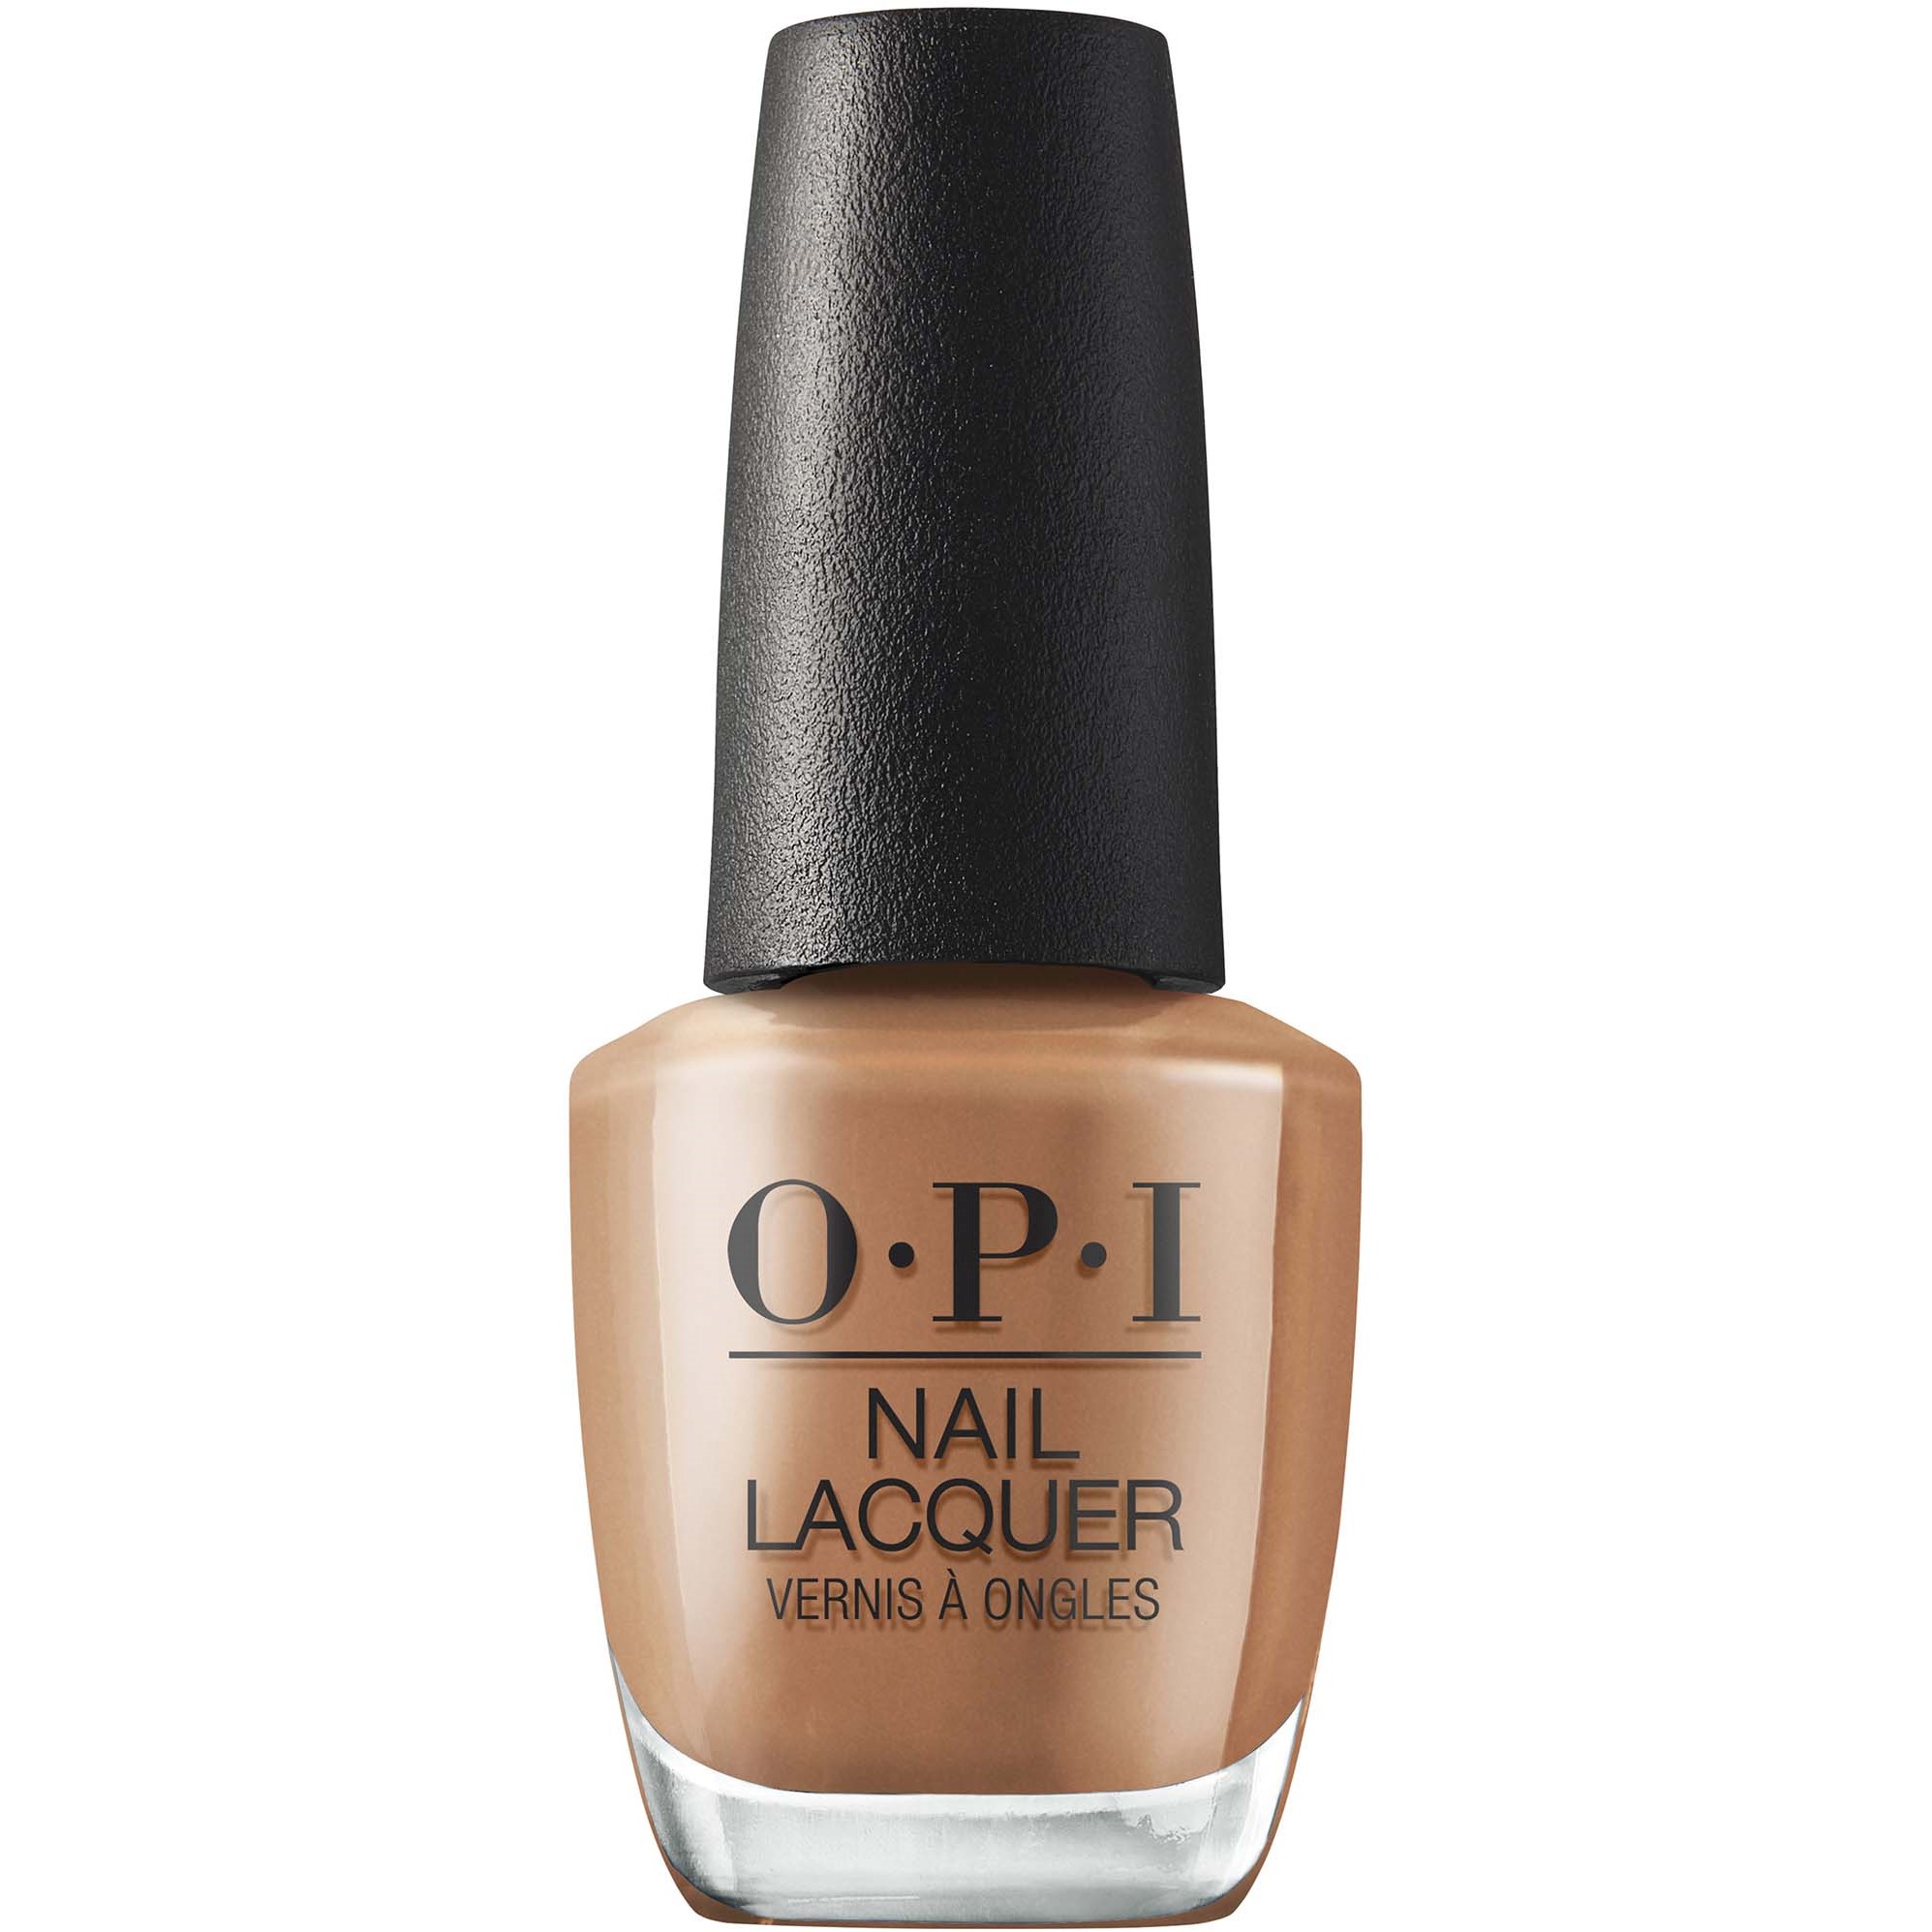 Opi Nail Lacquer Your Way Spice Up Your Life - Bruin